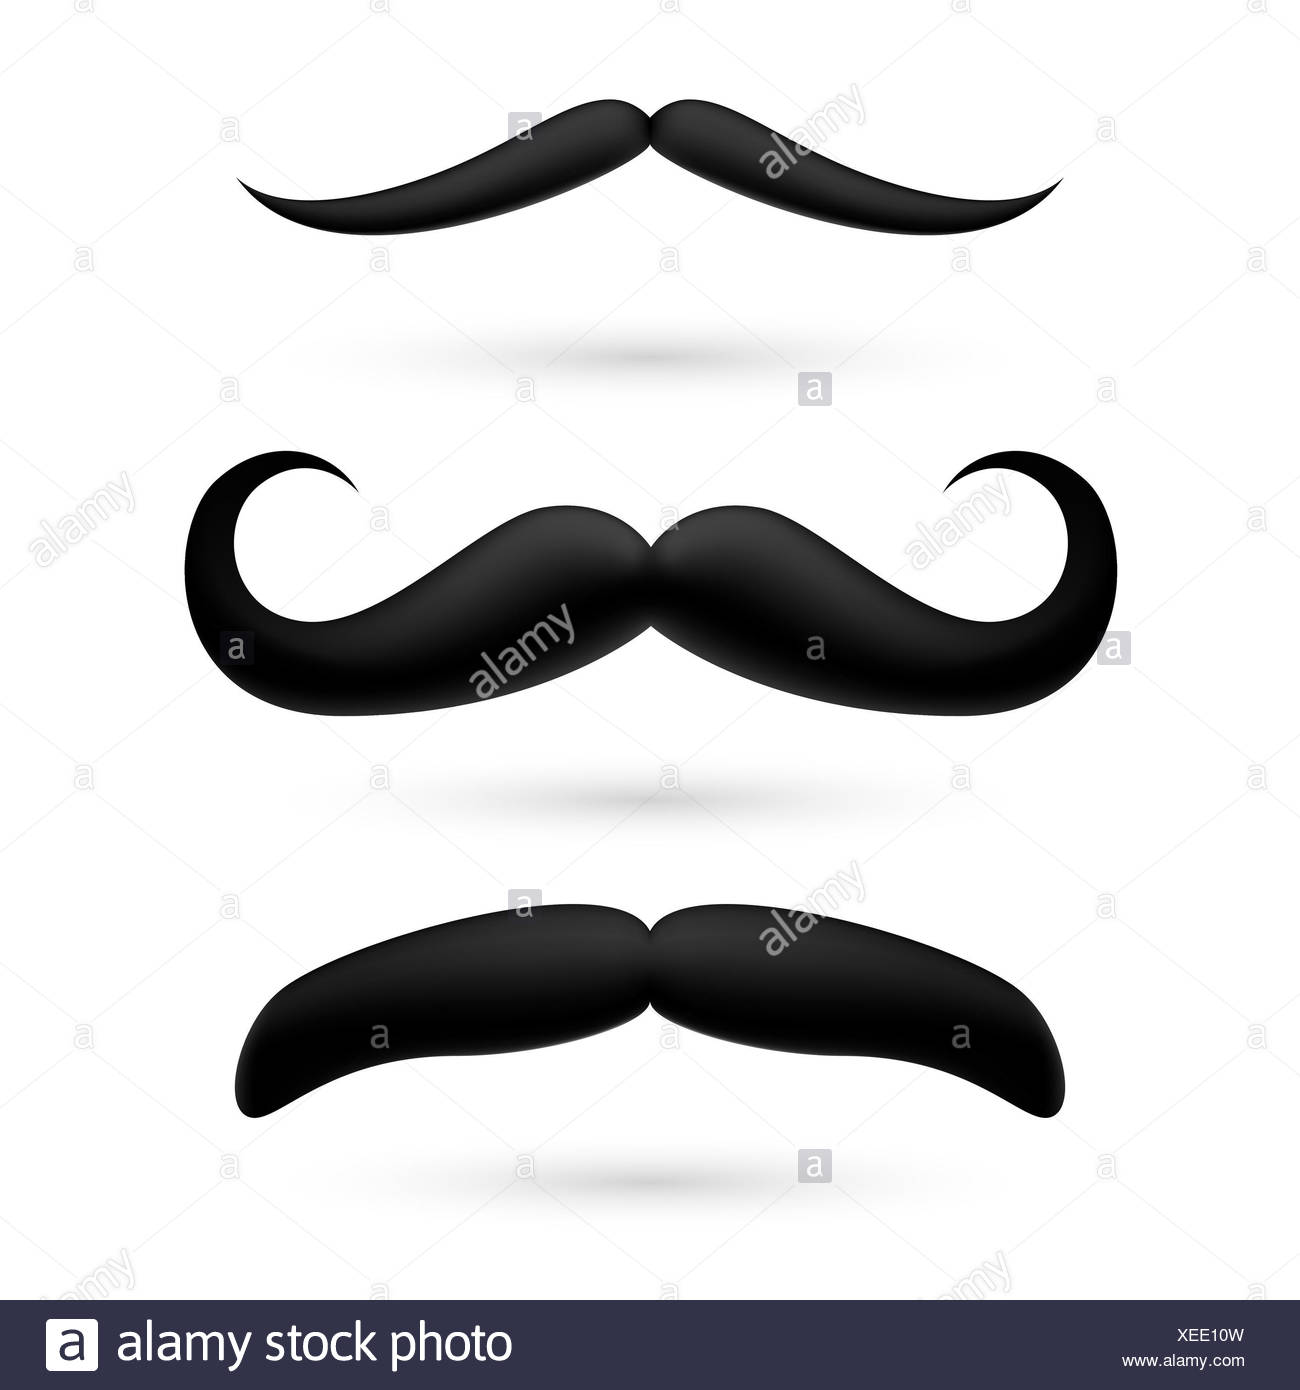 Funny Mouth Moustache Stock Photos & Funny Mouth Moustache Stock Images ...